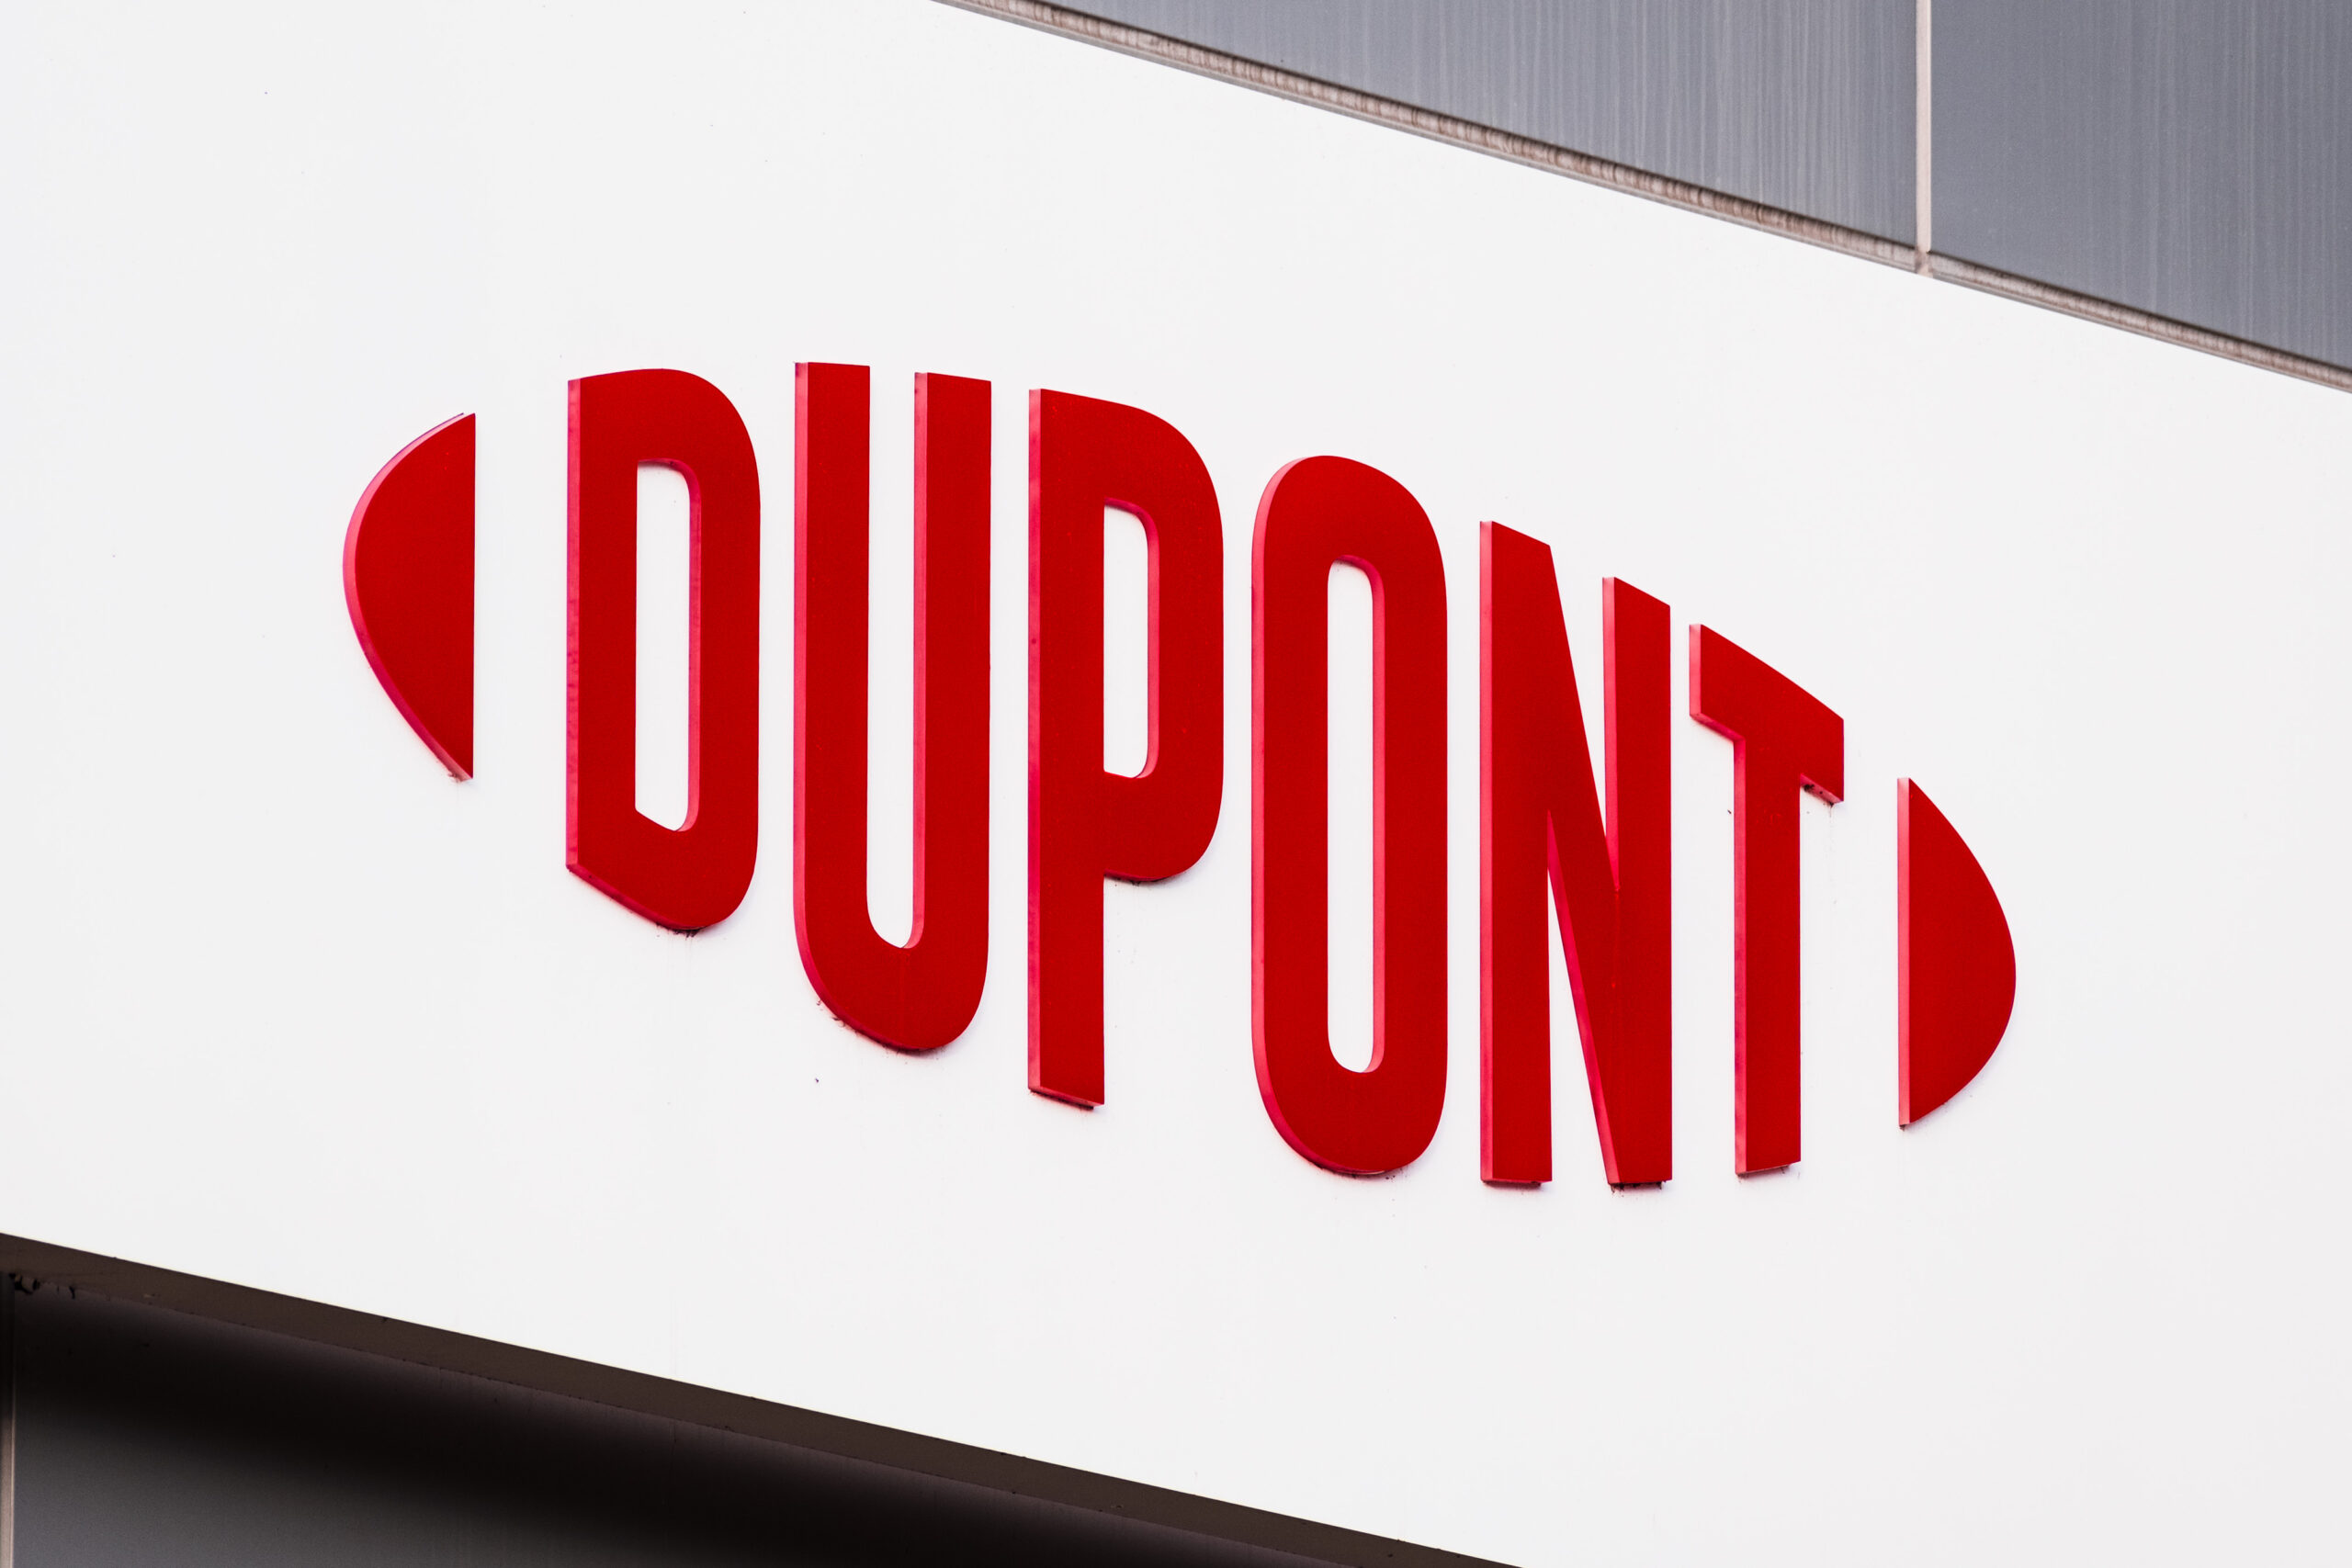 new-nationwide-unpaid-pre-shift-work-lawsuit-filed-against-dupont